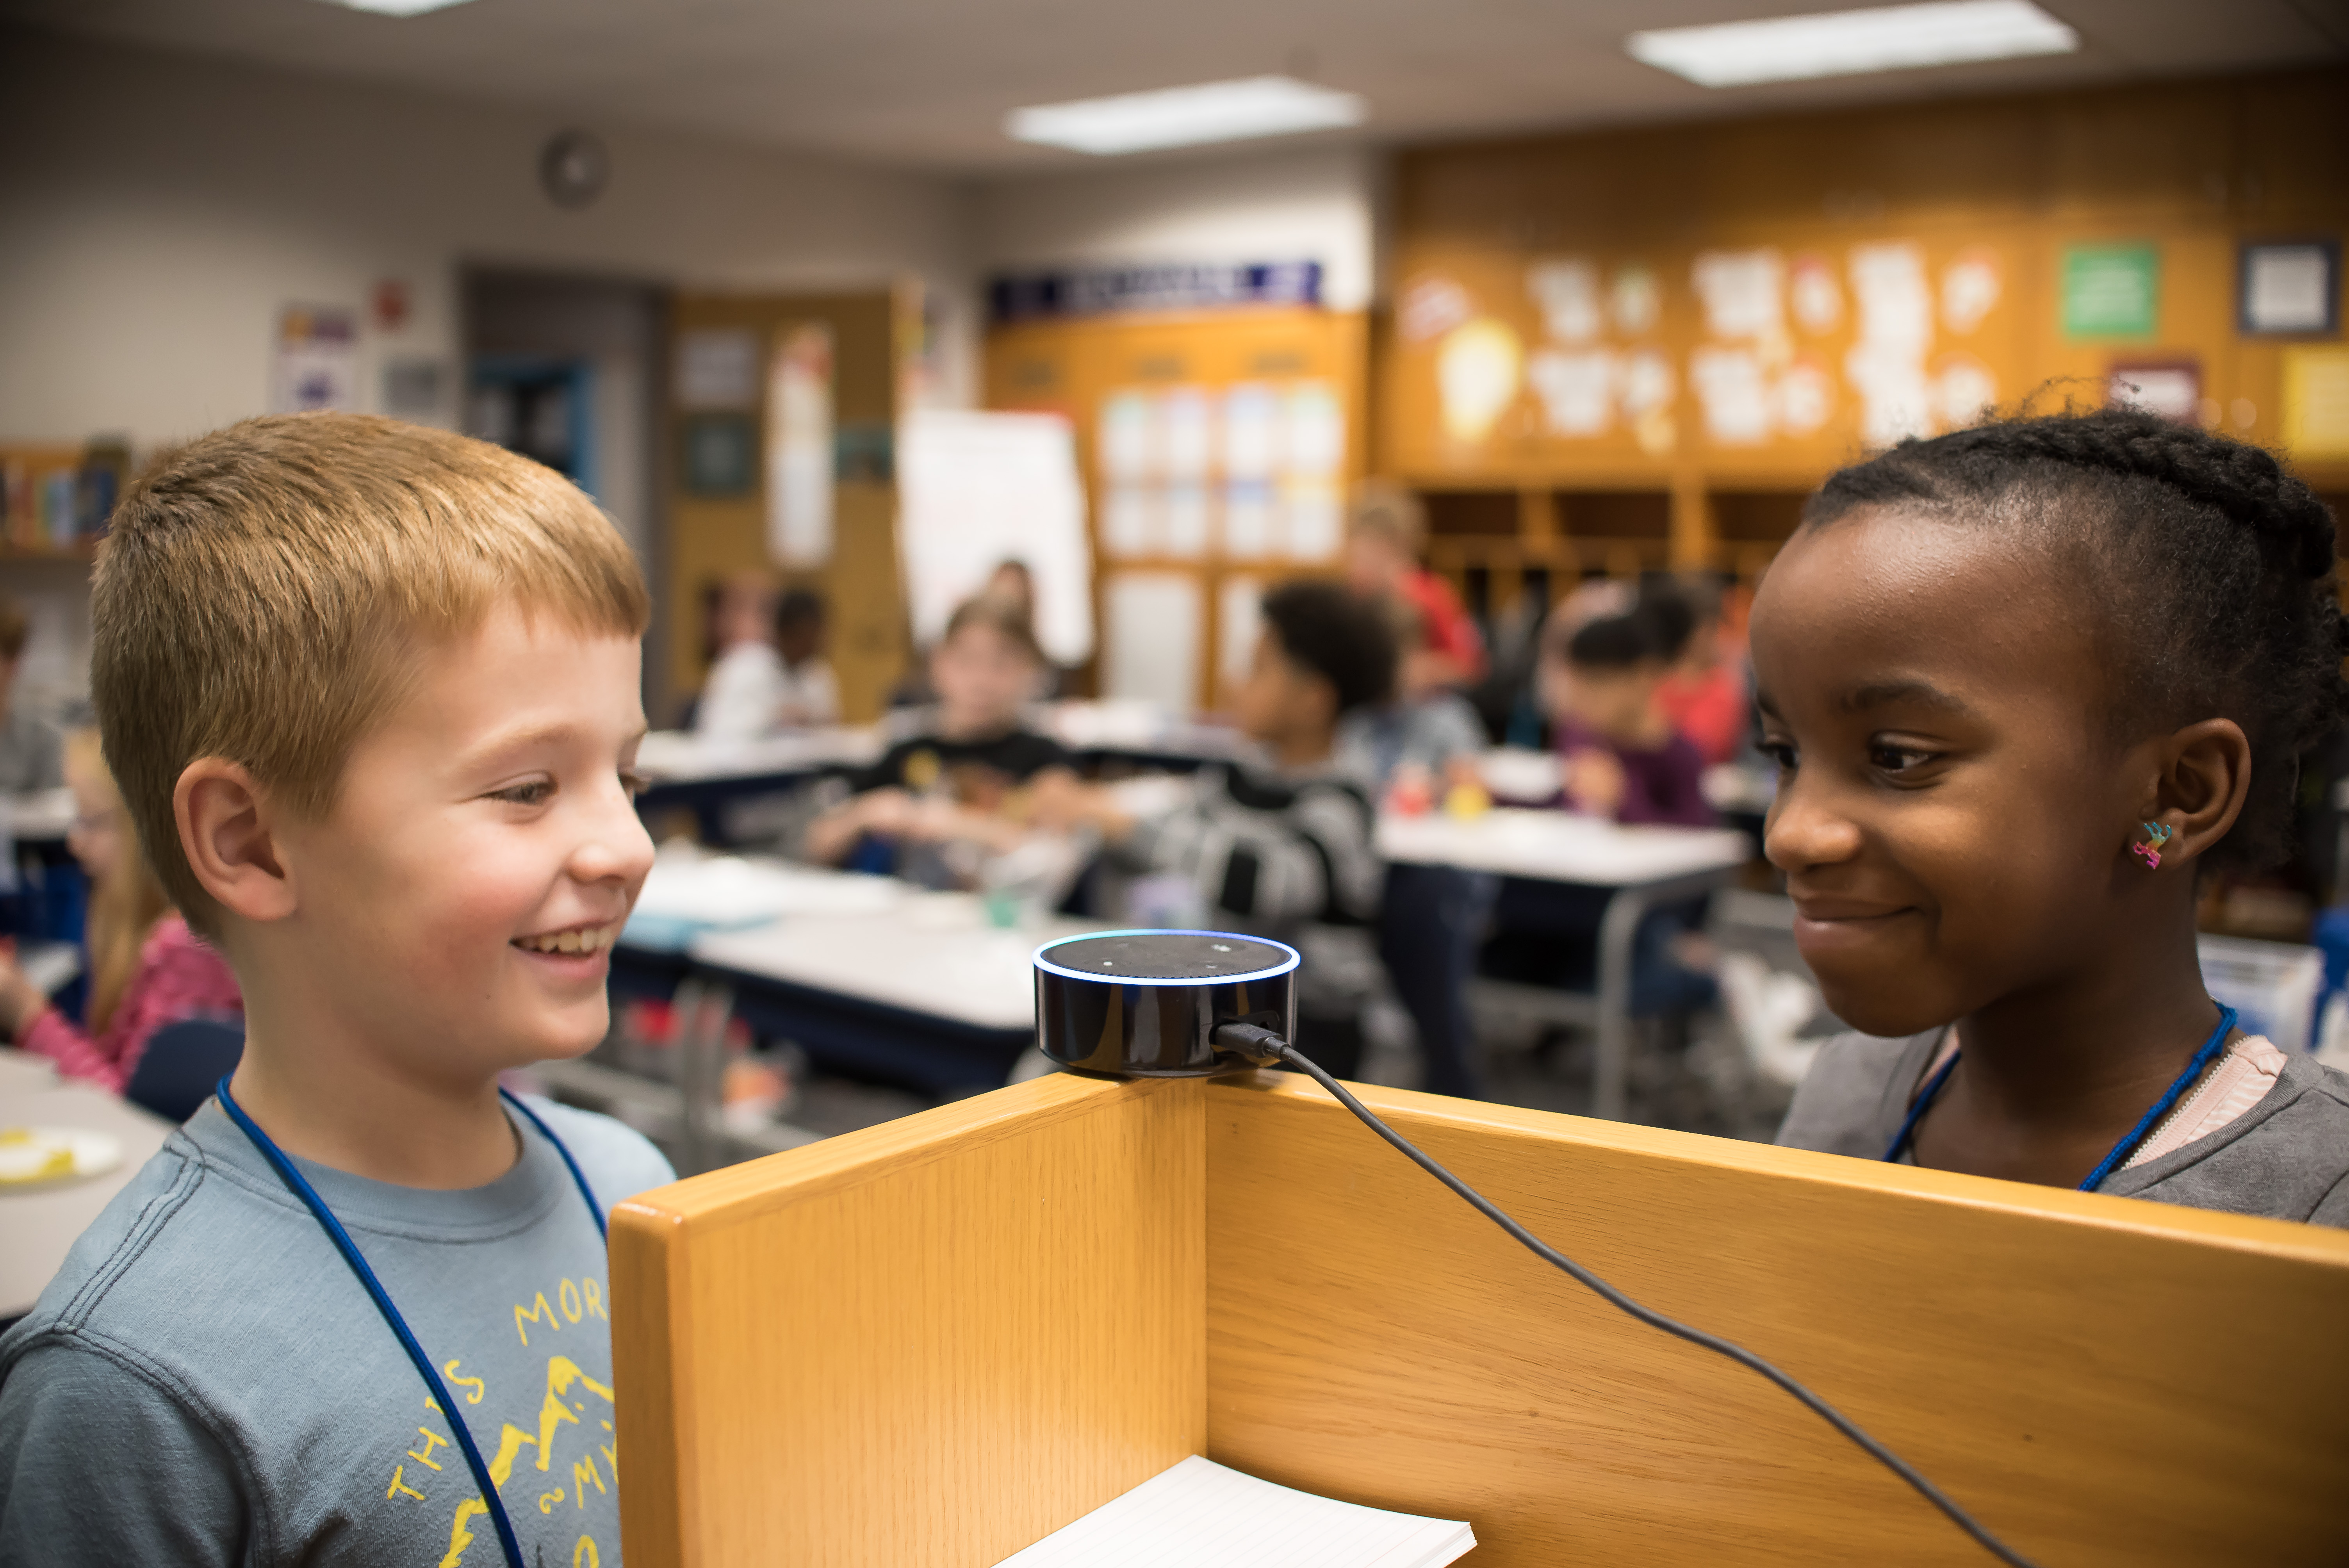 VOICE-ACTIVATED Q&A—Students in the Metropolitan School District of Wayne Township in Indiana ask Alexa questions about what they’re studying. For safety reasons, the IT team has connected the device to a specialized Wi-Fi network.